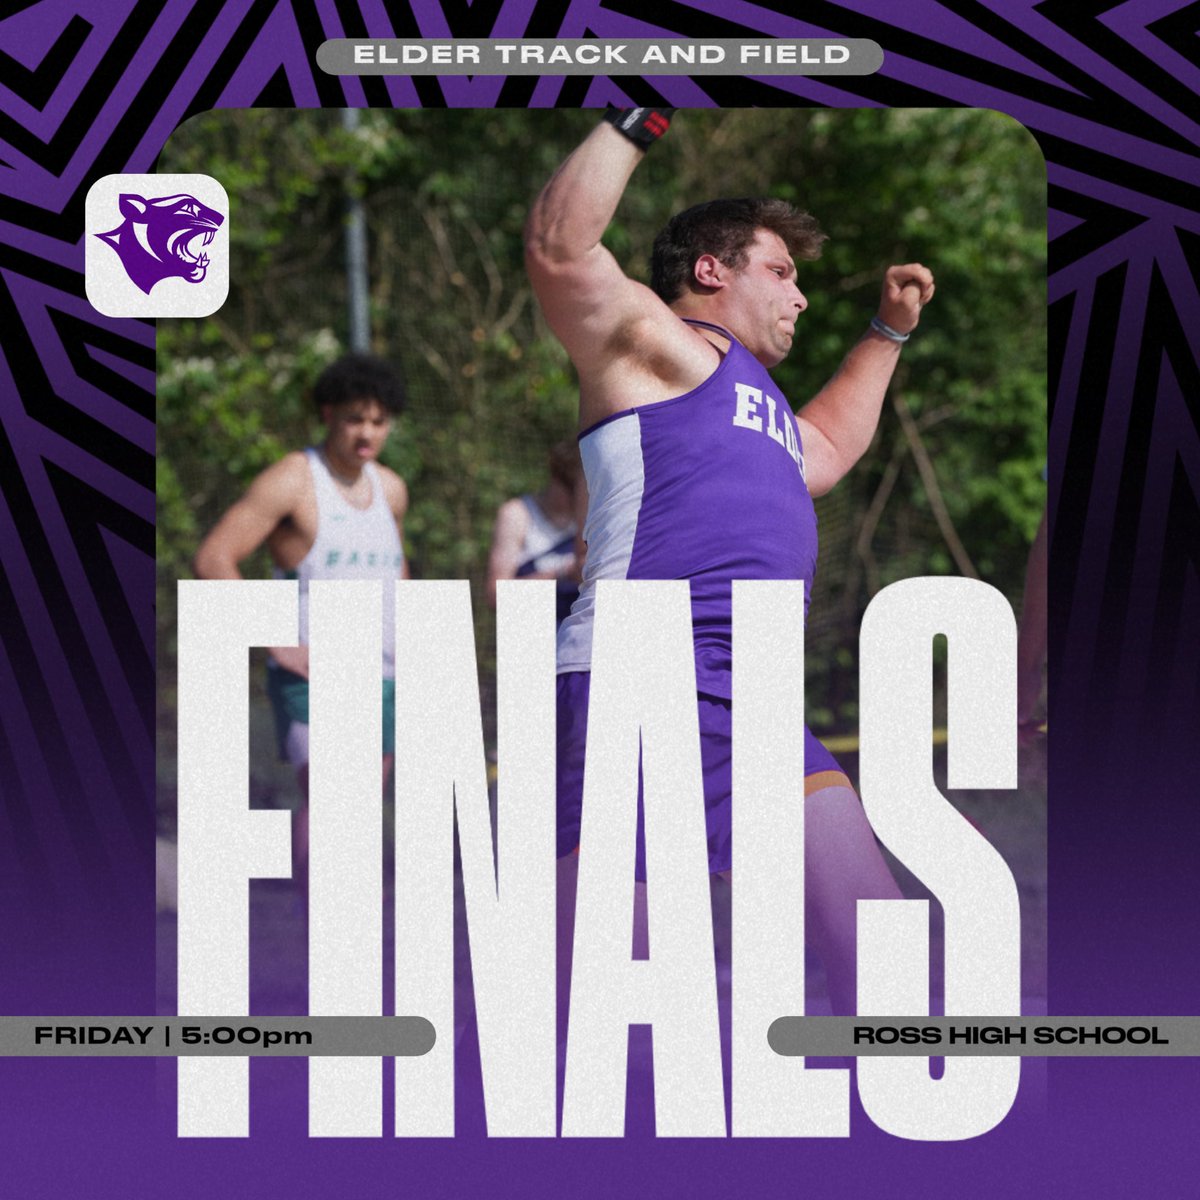 It’s MEET DAY!

The track and field team will compete in the District Finals tonight out at Ross!

Field (high jump / shot put) - 4:00pm
Running - 6:00pm
📋 Results: timingspot.com

#GoPanthers #ElderTrackAndField